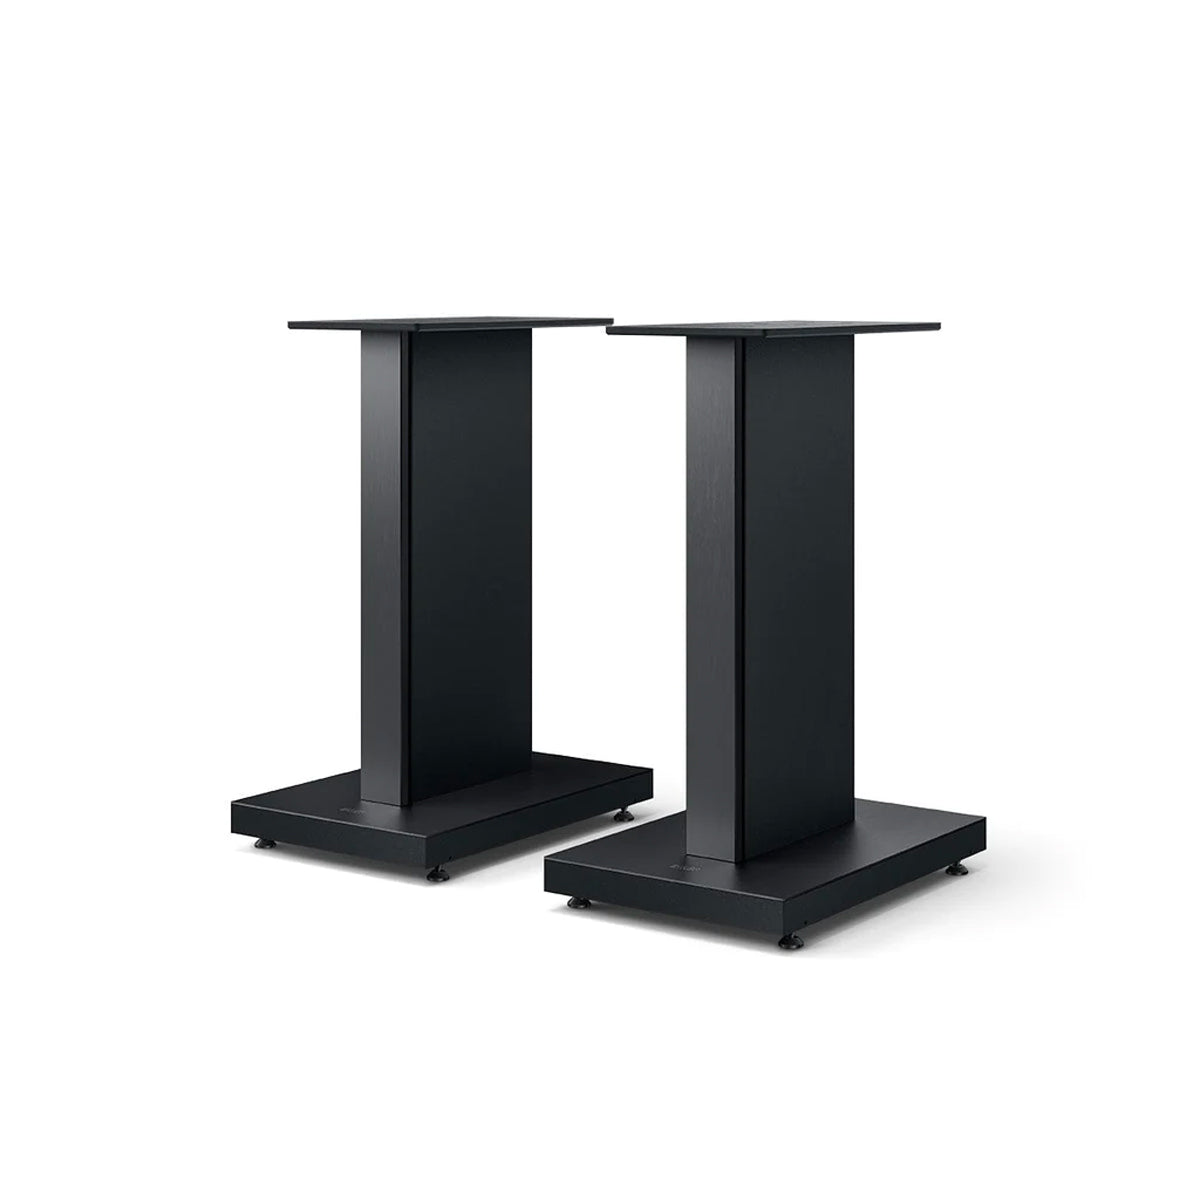 KEF S-RF1 Floor Stands - Carbon Black (Pair) - The Audio Experts